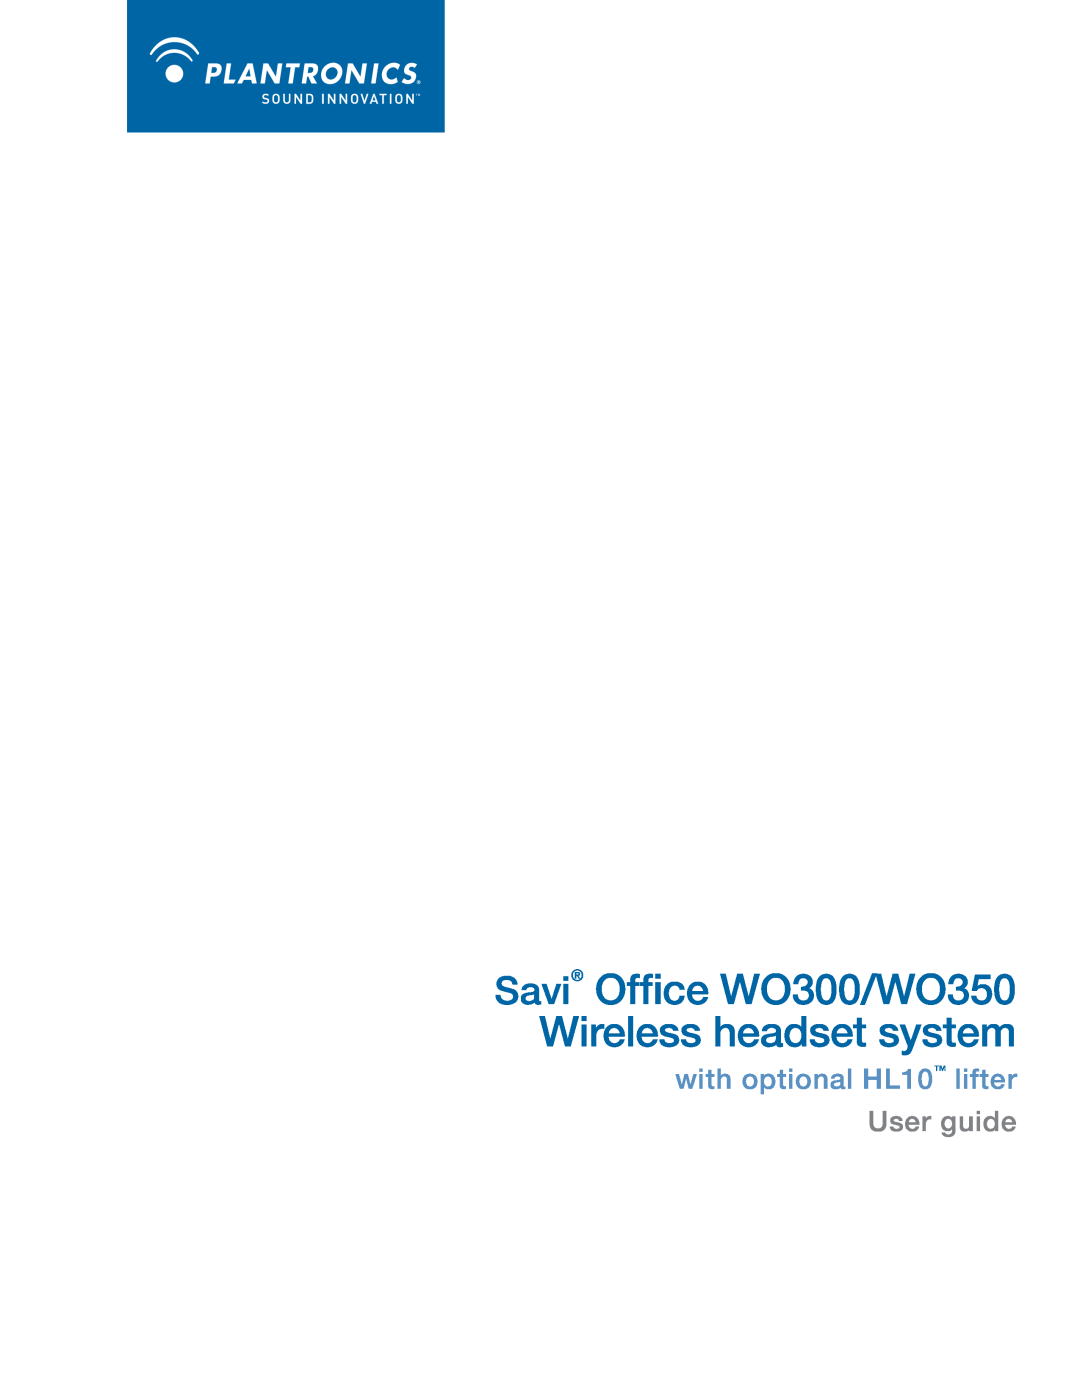 Plantronics manual Savi Office WO300/WO350 Wireless Headset System, with Optional HL10 Lifter User Guide 